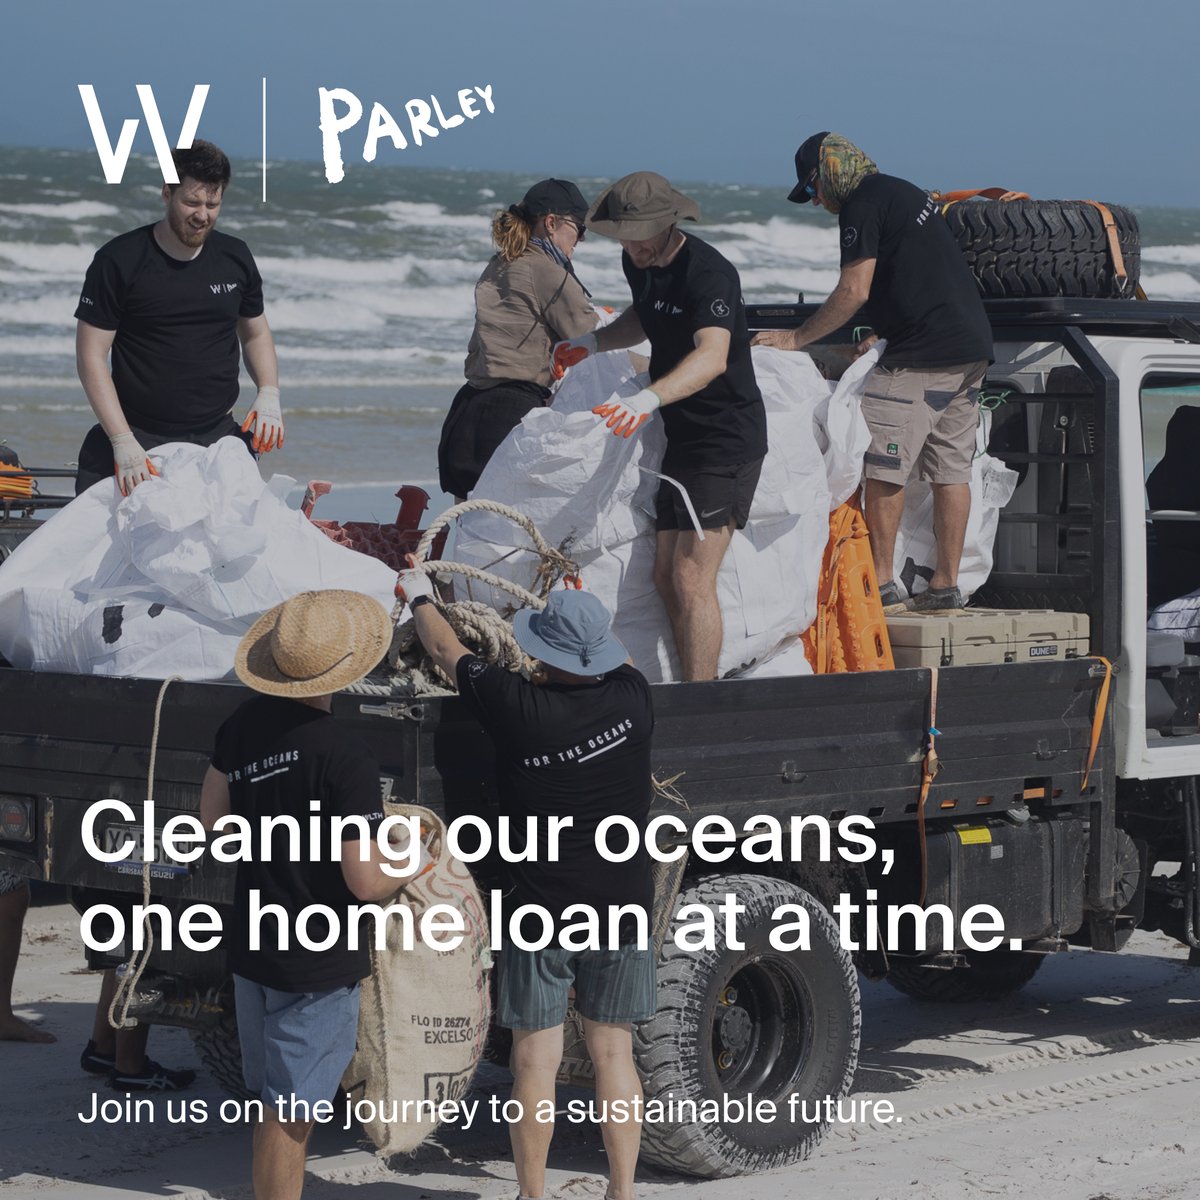 This phrase encompasses exactly what we stand for on a daily basis. For every loan settled by WLTH, we will empower and assist Parley for the Oceans to clean up 50m² of Australian beach and coastline.

#wlth #parley #fortheoceans #loansfortheoceans